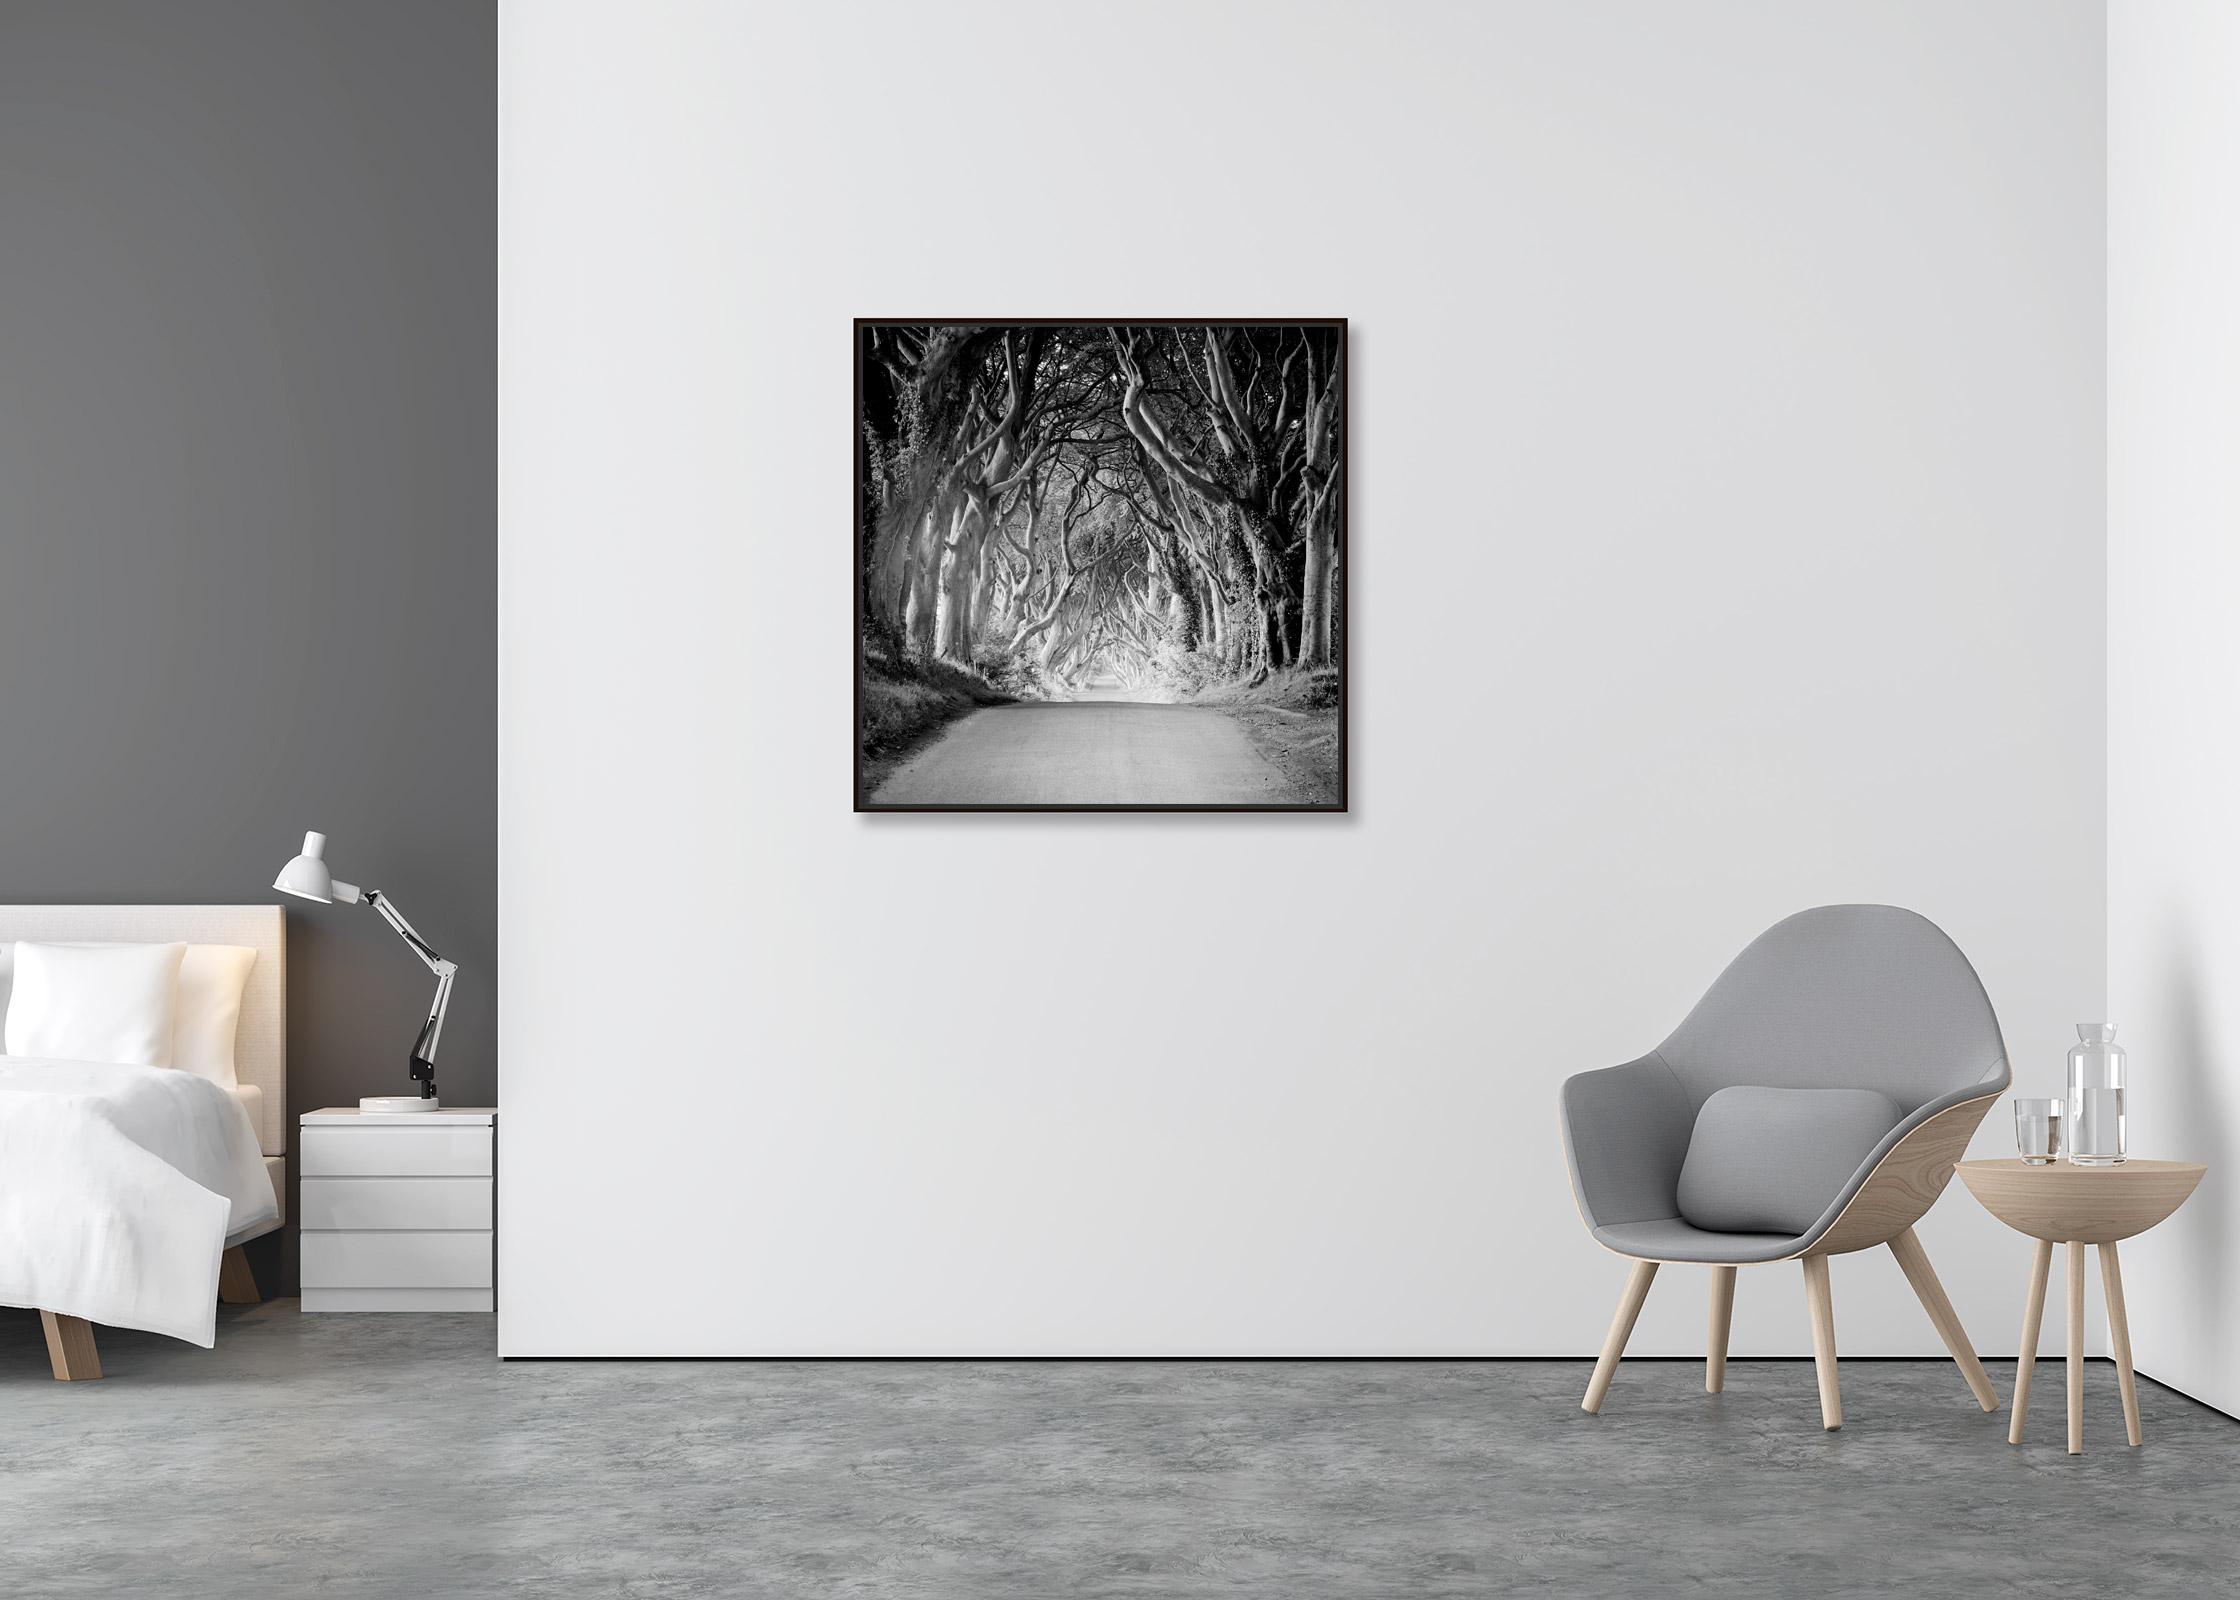 Dark Hedges, Ireland, Tree Avenue, black and white art landscape photography - Contemporary Photograph by Gerald Berghammer